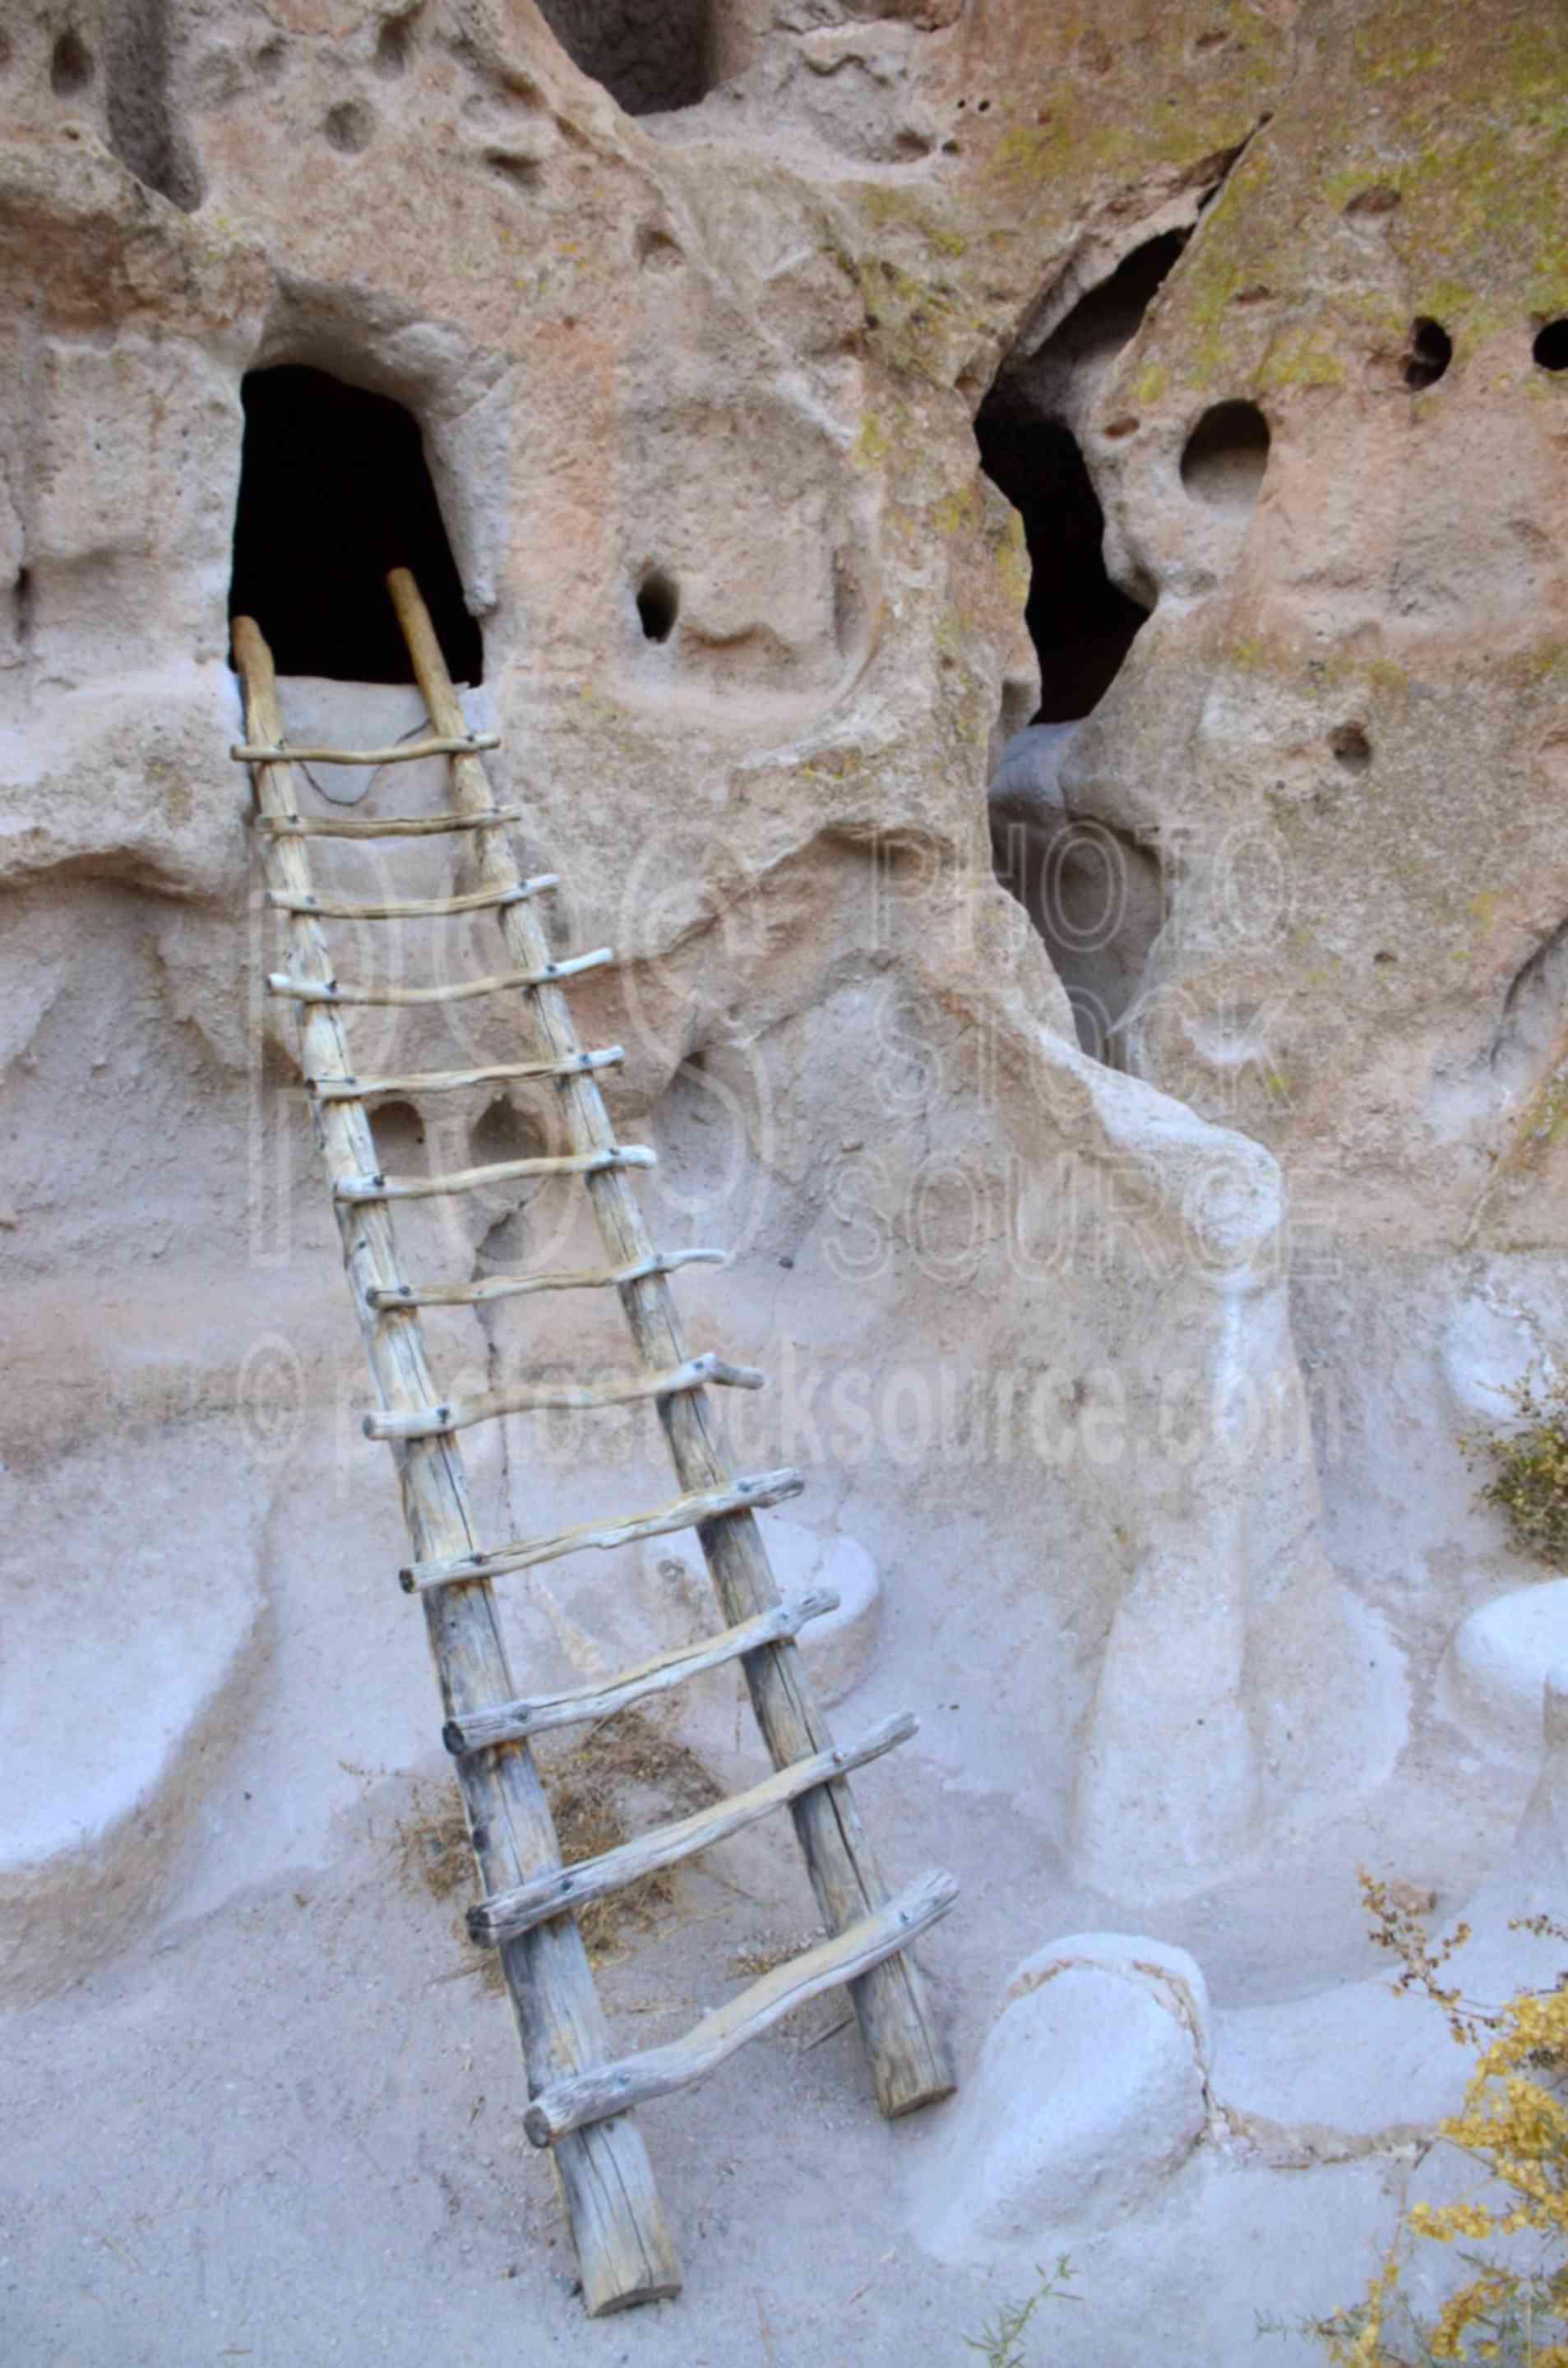 Long House Ladder and Caves,ladder,cave,niche,native american,american indian,ruin,house,archeology,stone,building,dwelling,cliff,bandelier,national monument